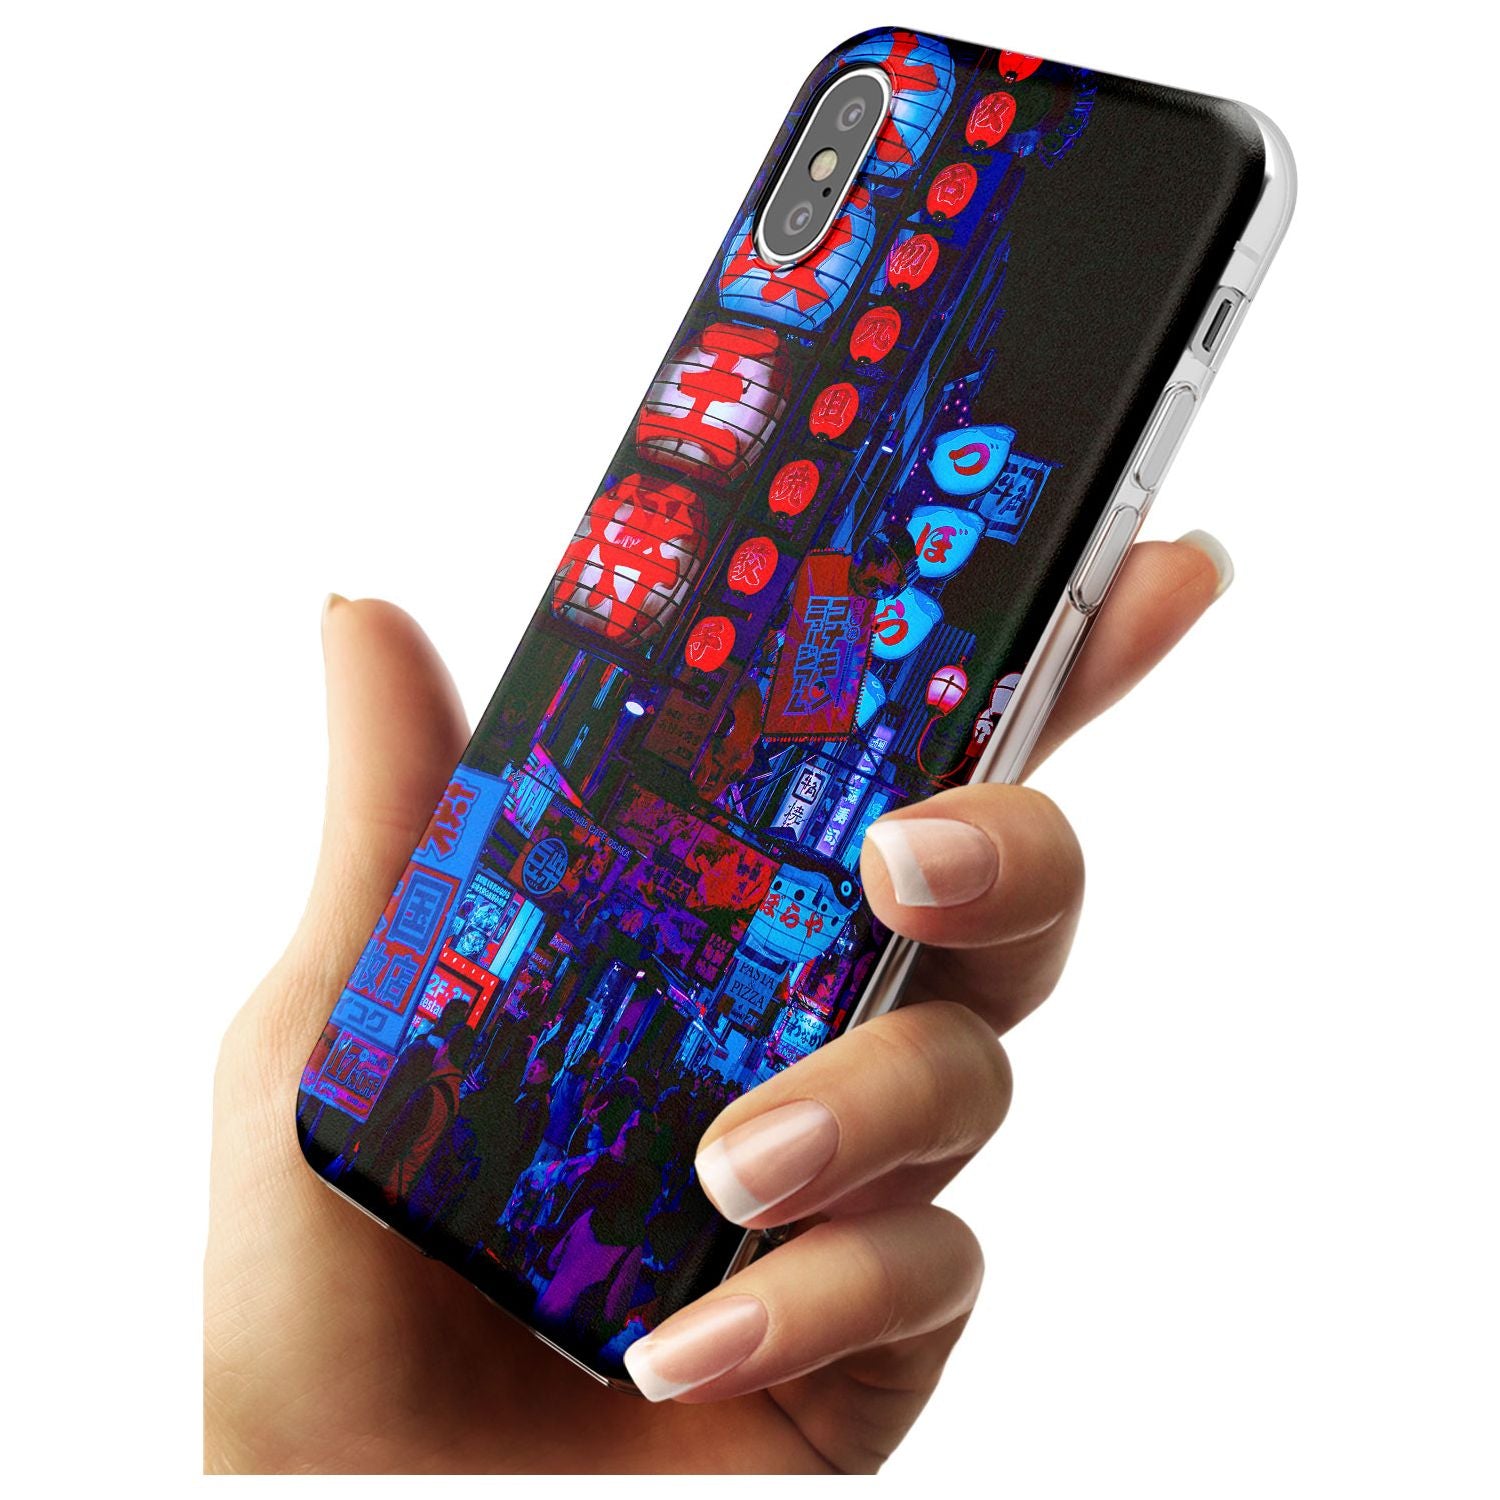 Red & Turquoise - Neon Cities Photographs Slim TPU Phone Case Warehouse X XS Max XR